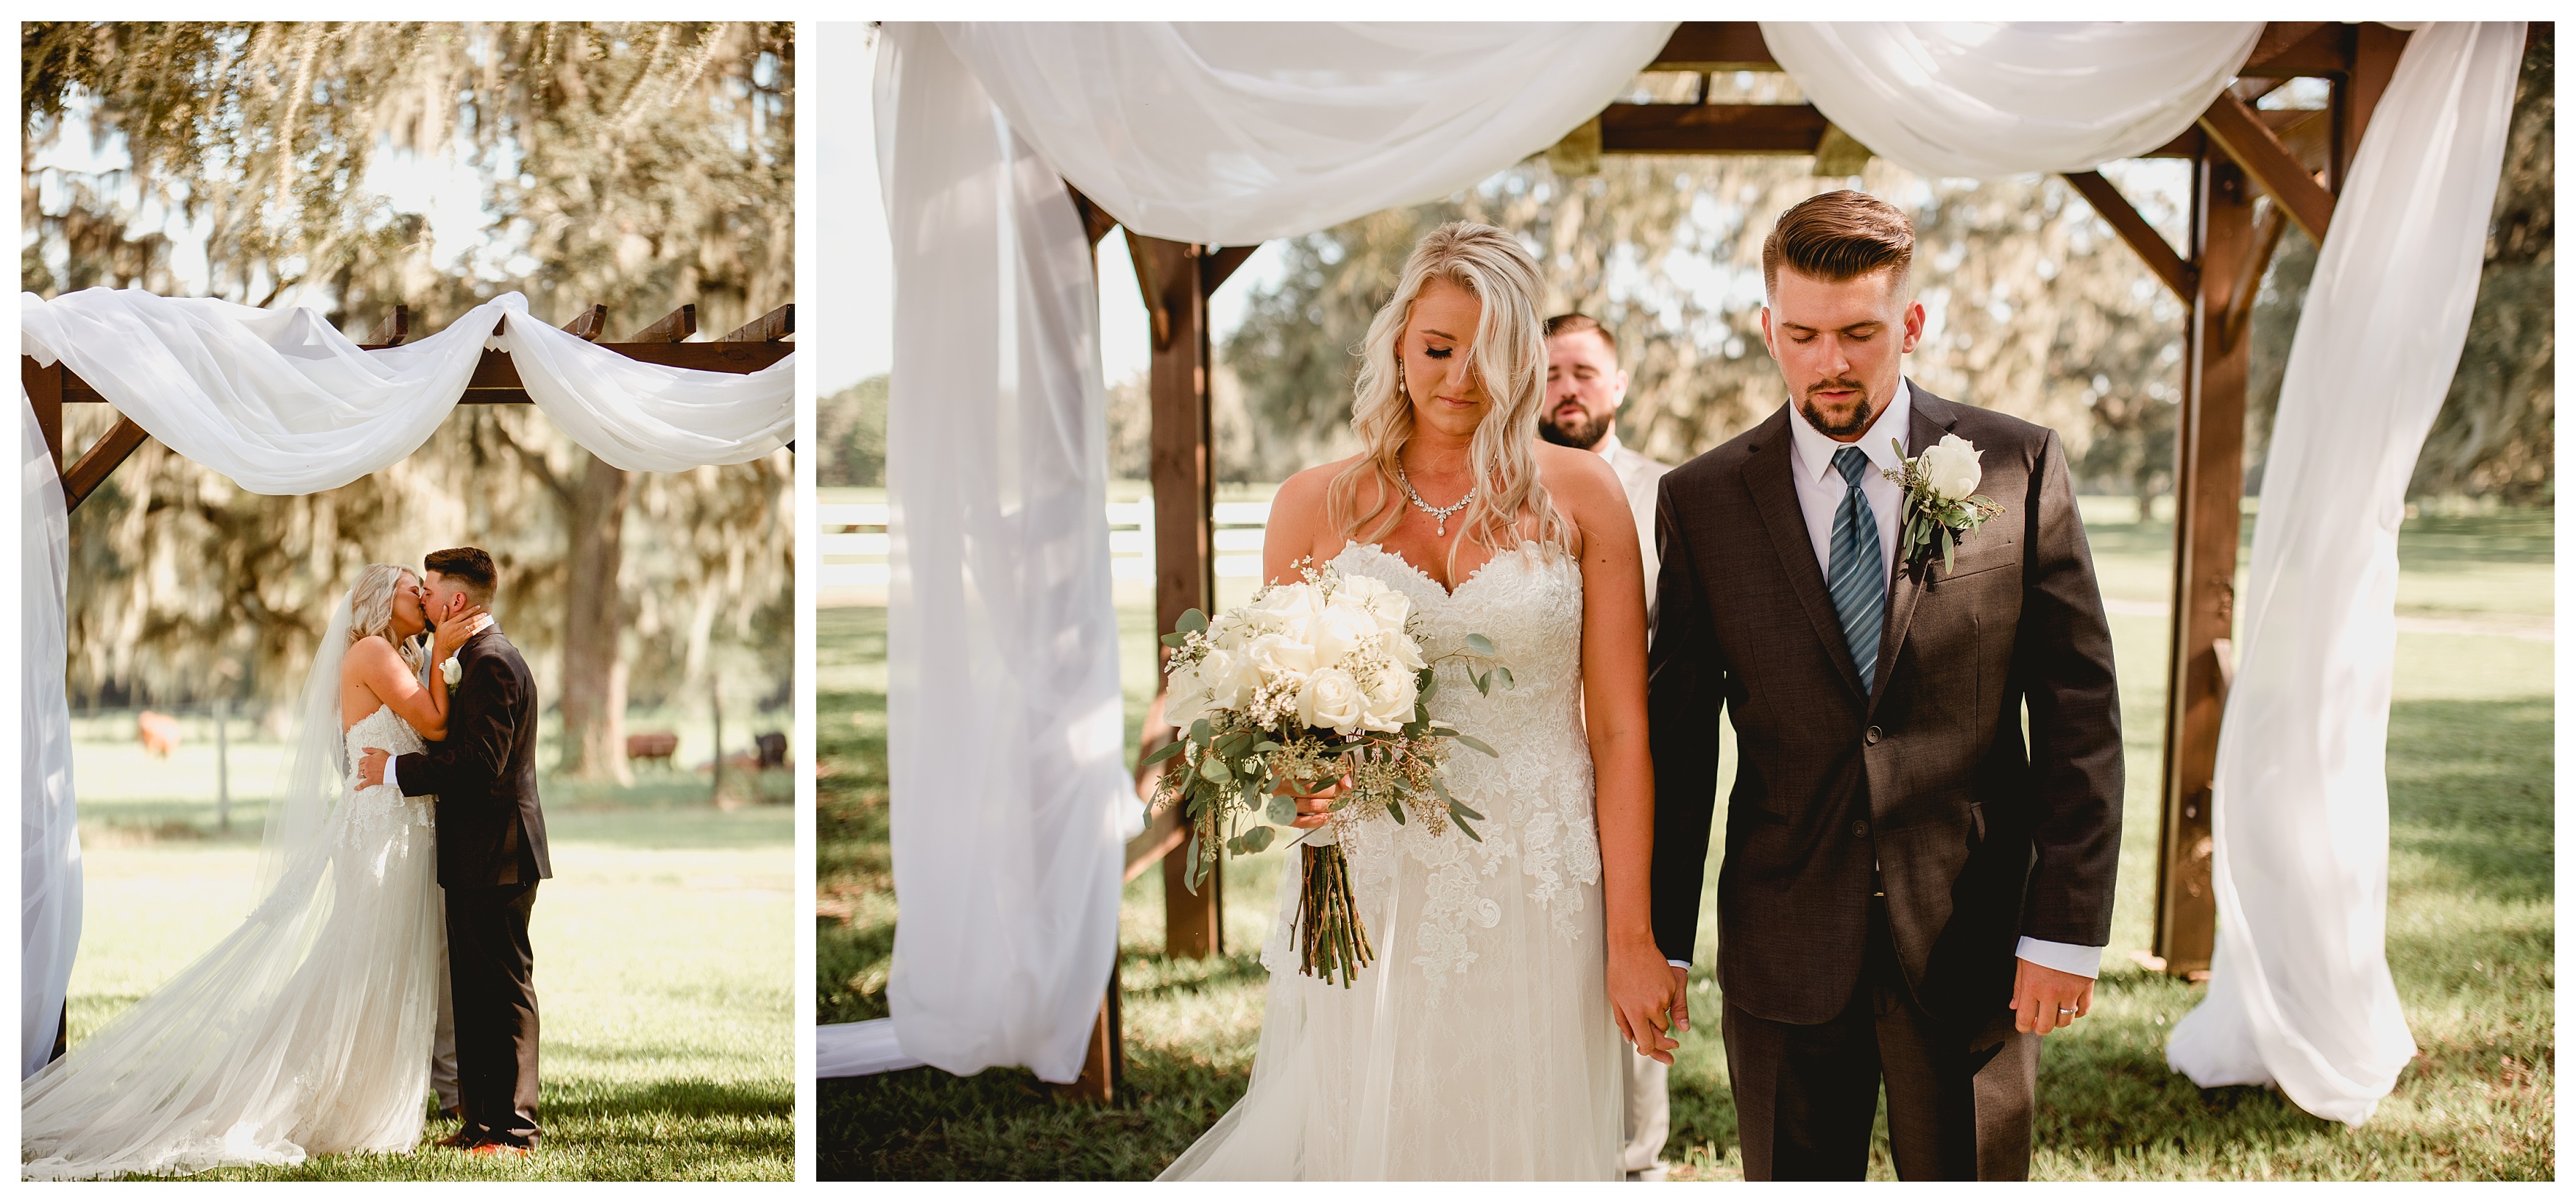 First kiss moment by natural candid wedding portrait photographer. Shelly Williams Photography located in North Florida.